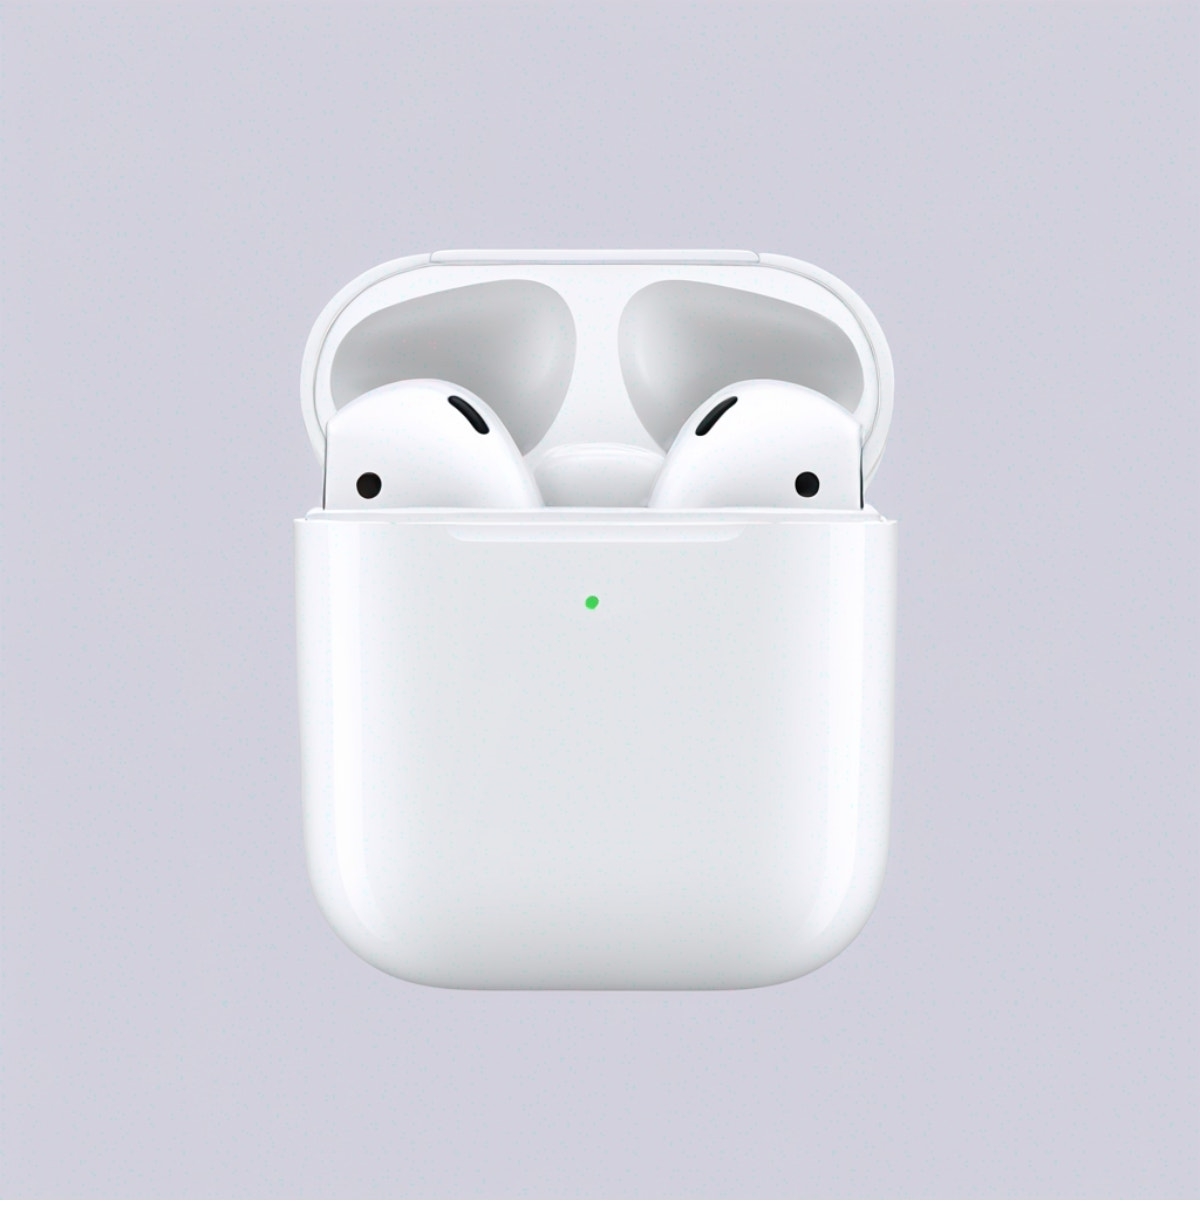 Open case with wireless earbuds against a plain background, trendy accessory